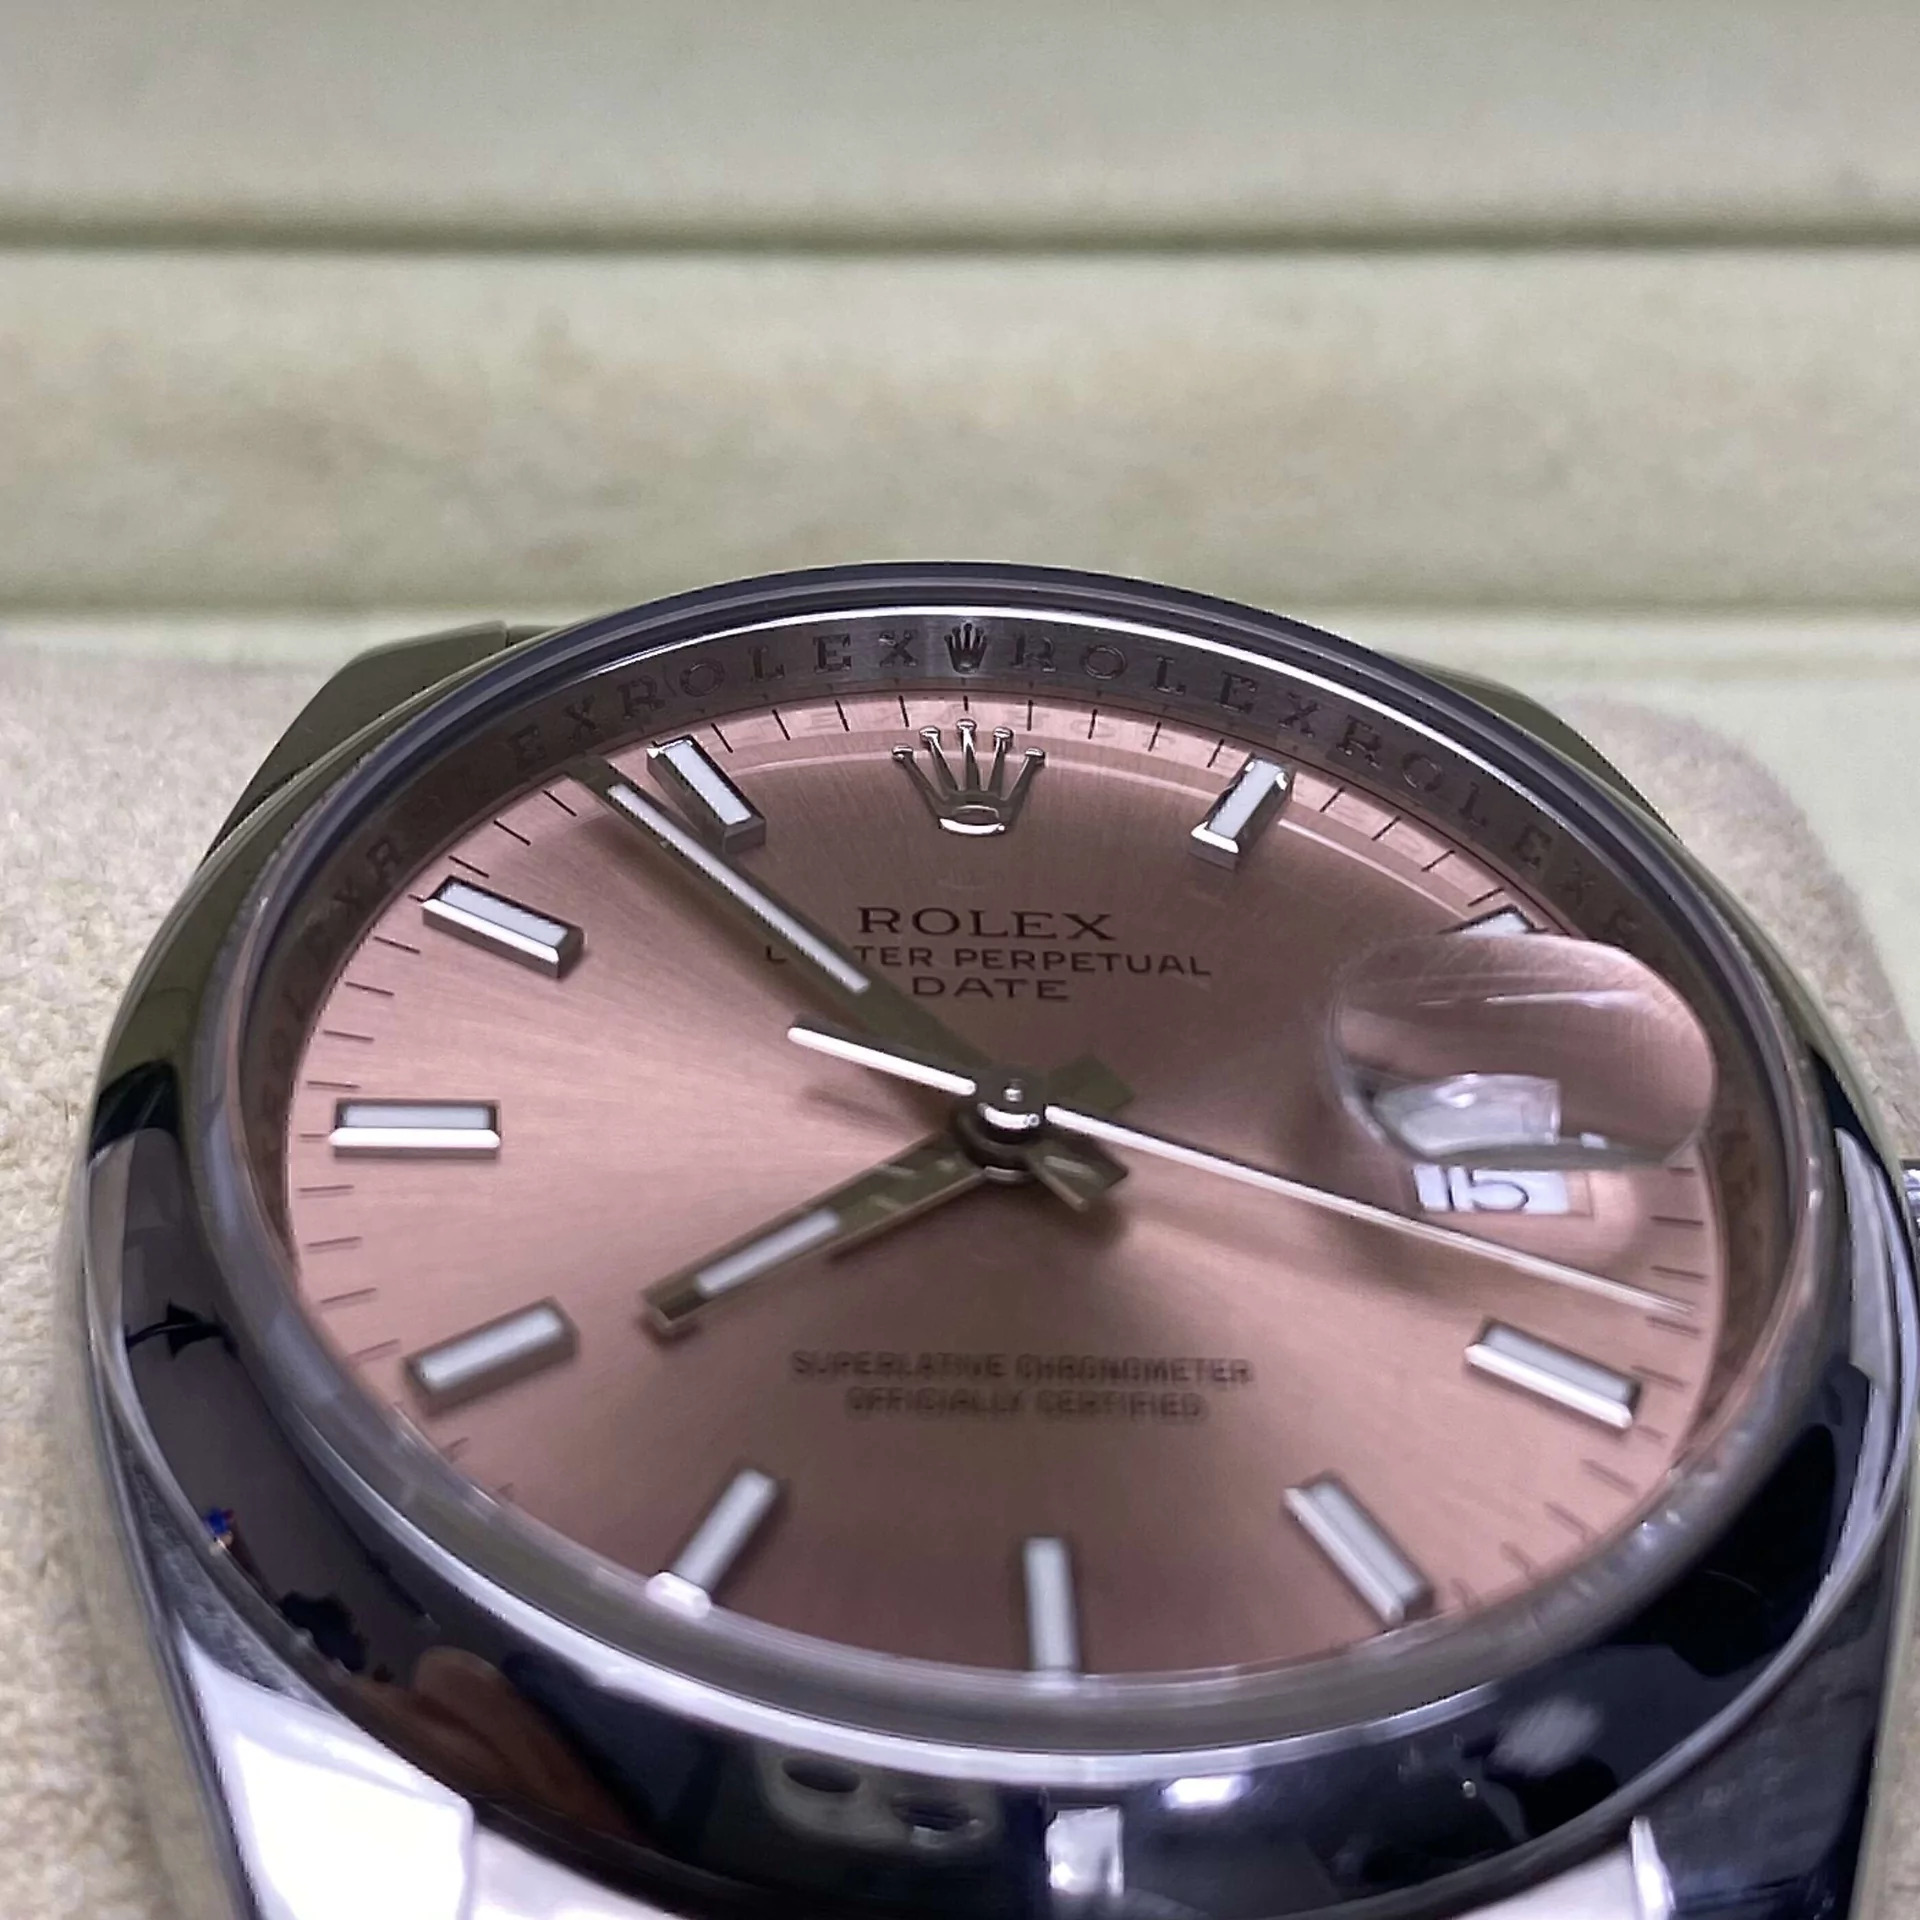 Relógio Rolex Oyster Perpetual - 36 mm